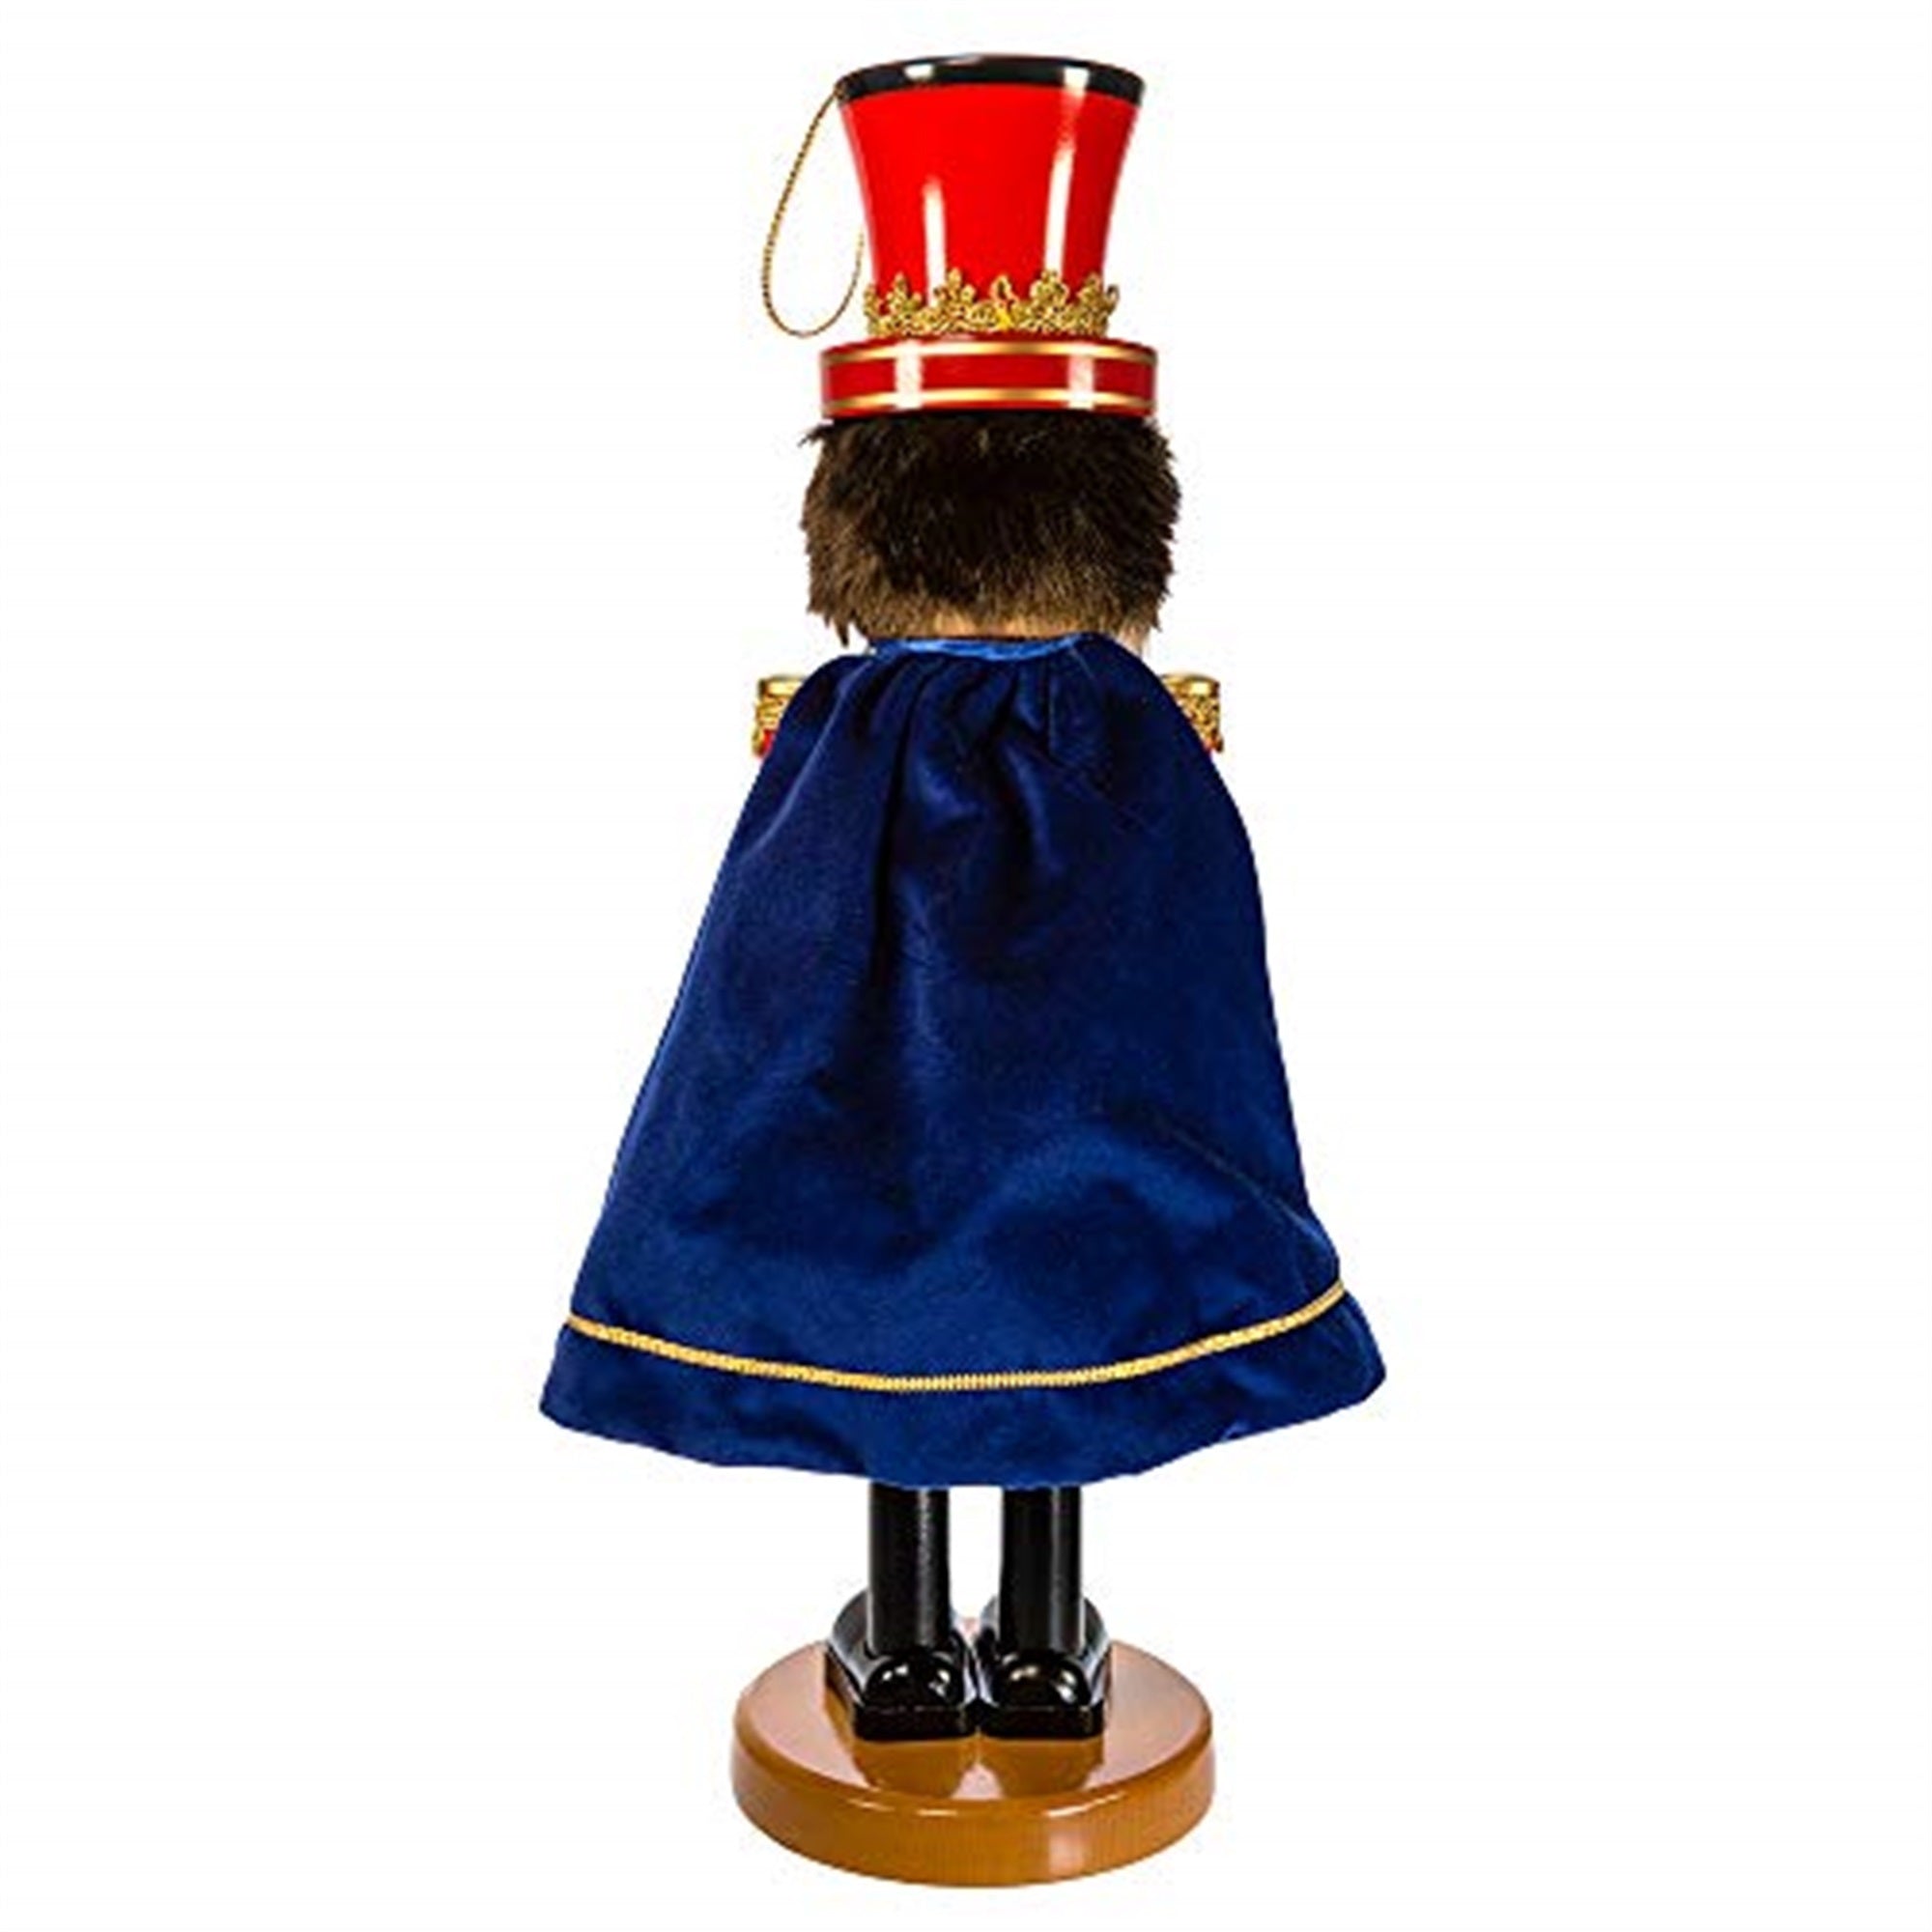 Steinbach Limited Edition The Nutcracker Suite Series, 2nd in the Series, Prince Nutcracker, 21"